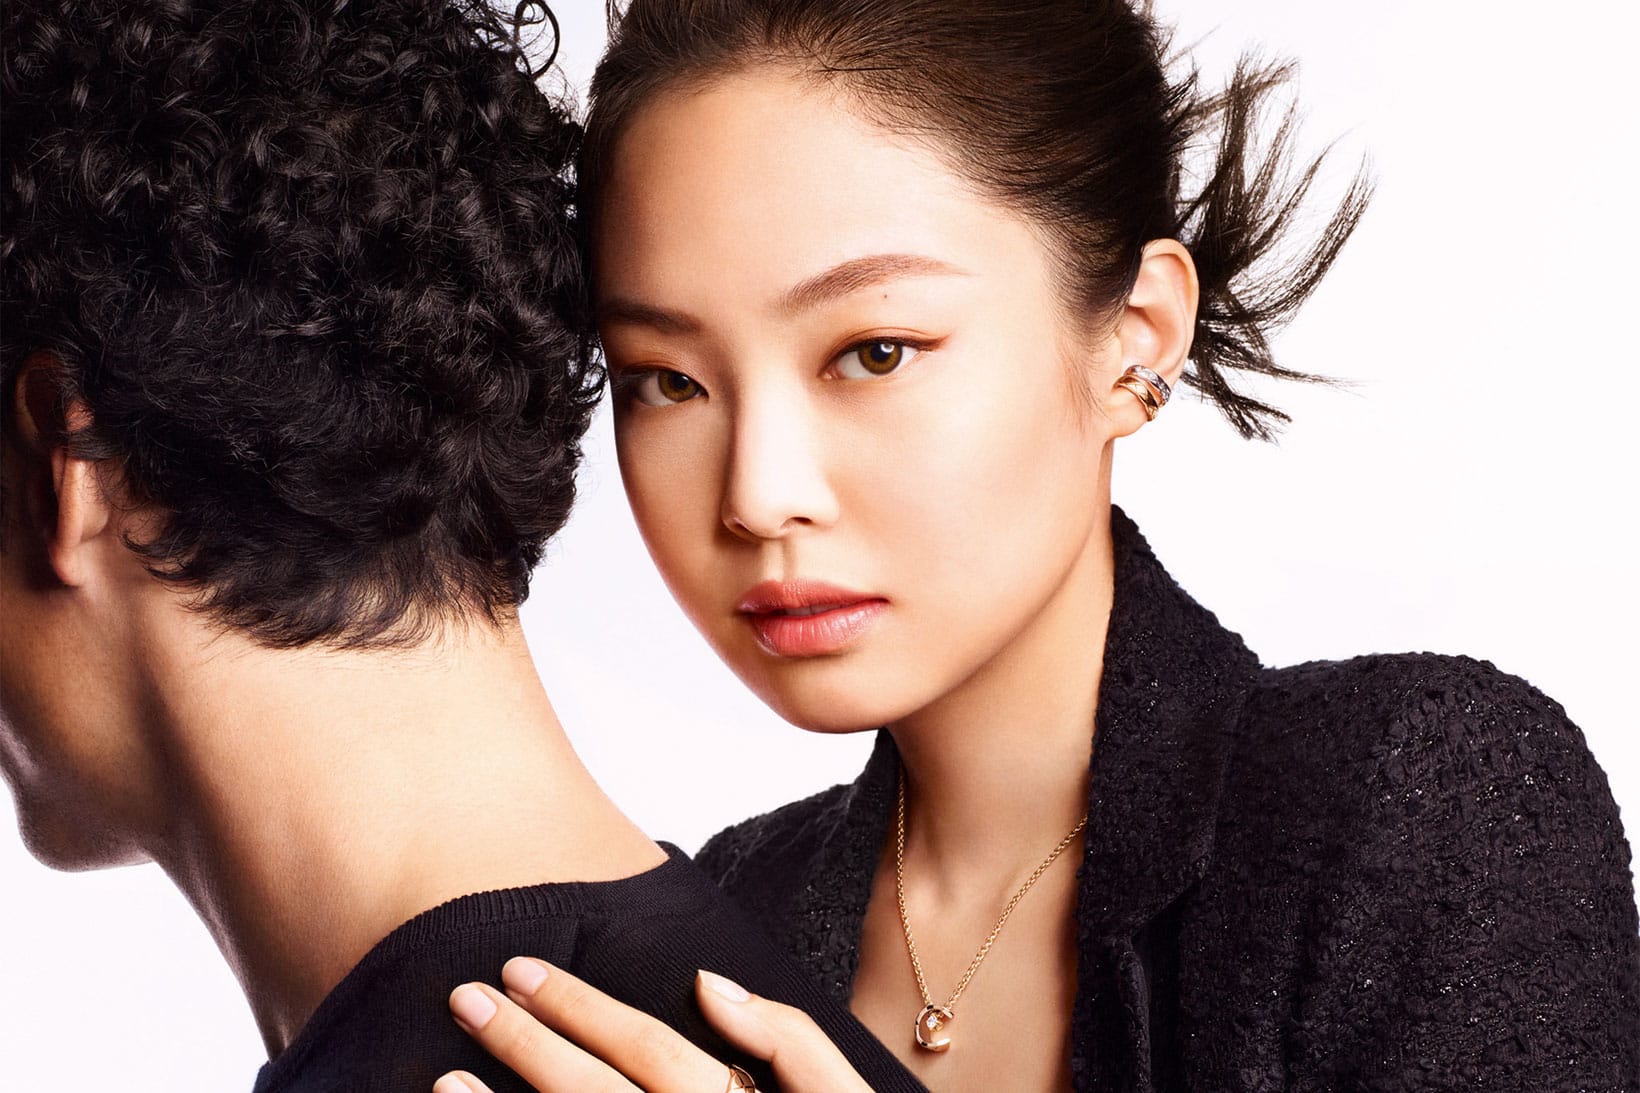 https%3A%2F%2Fhypebeast.com%2Fwp content%2Fblogs.dir%2F6%2Ffiles%2F2021%2F11%2Fjennie chanel coco crush jewelry campaign official images 0